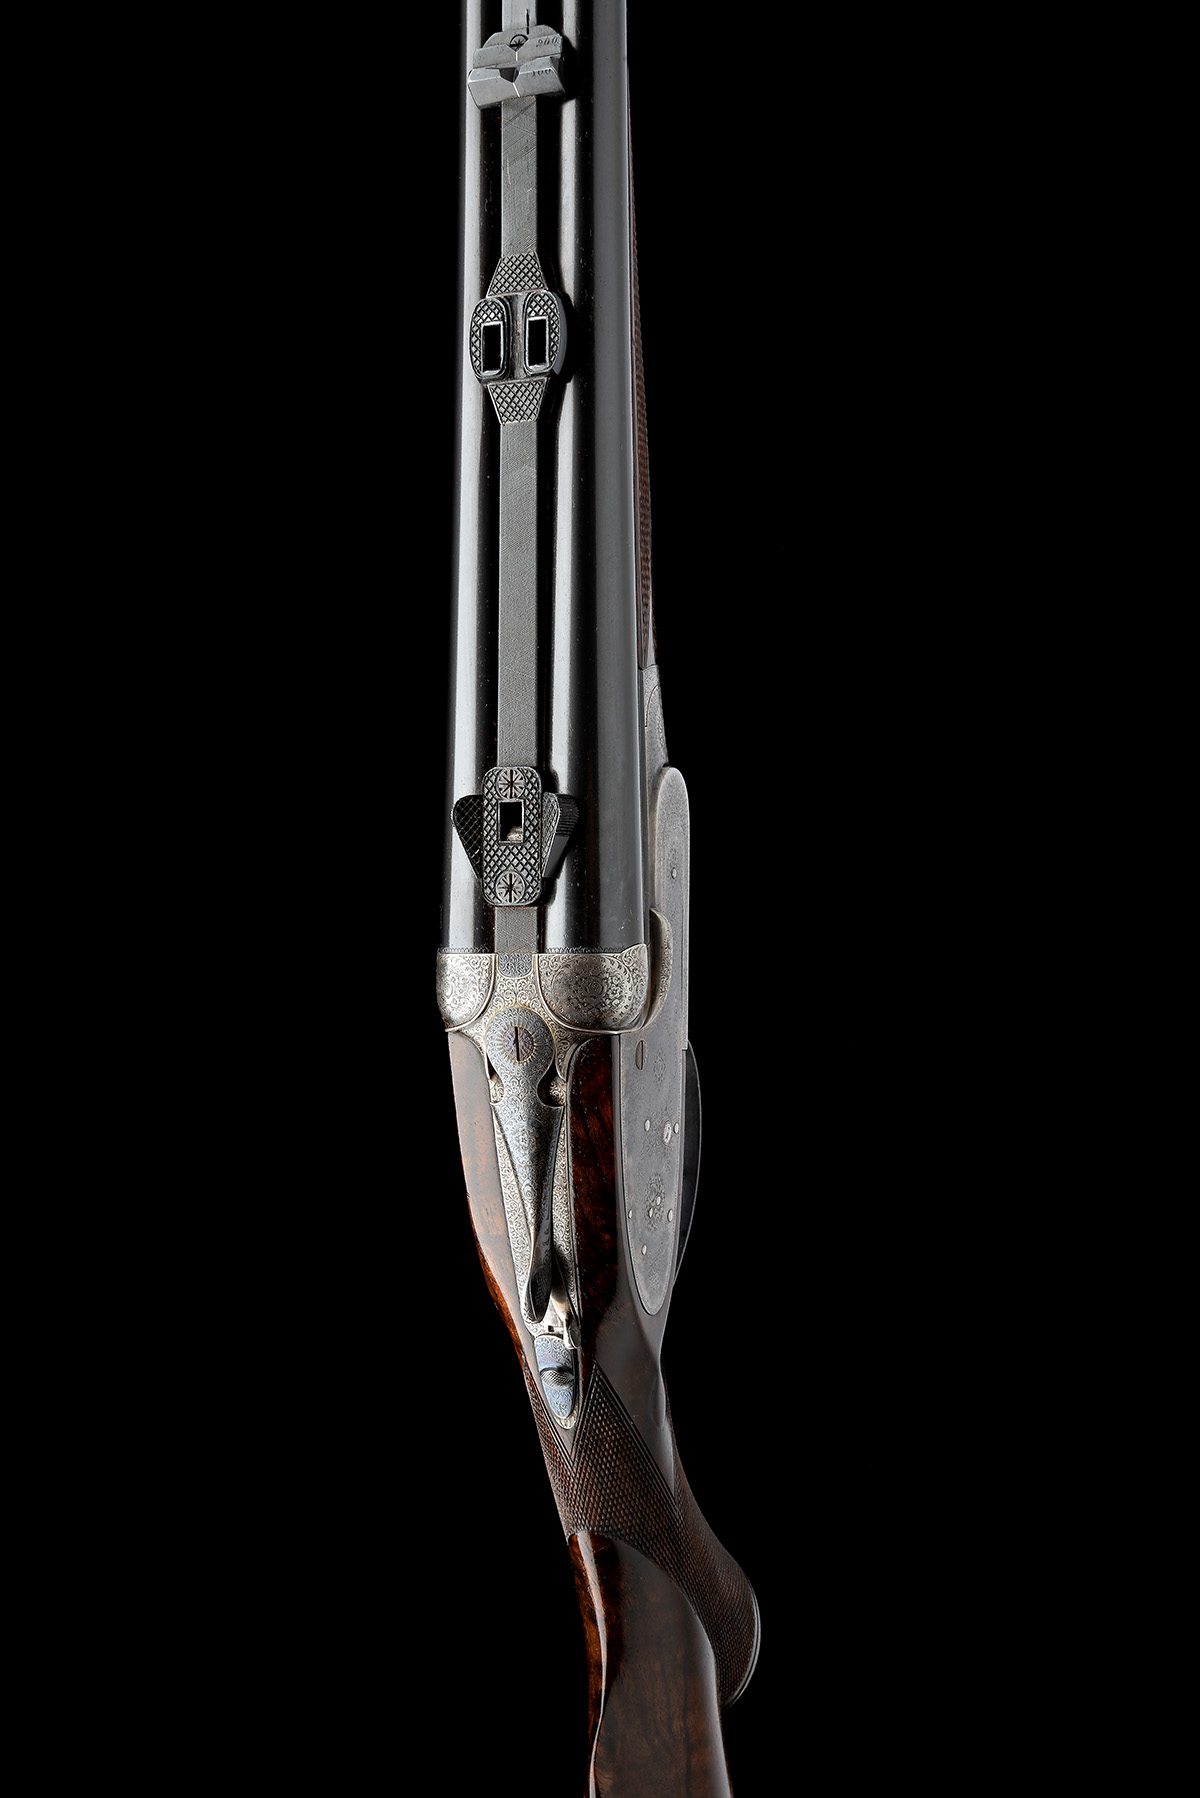 J. PURDEY & SONS A .303 NITRO EXPRESS SELF-OPENING SIDELOCK EJECTOR DOUBLE RIFLE, serial no. - Image 18 of 23